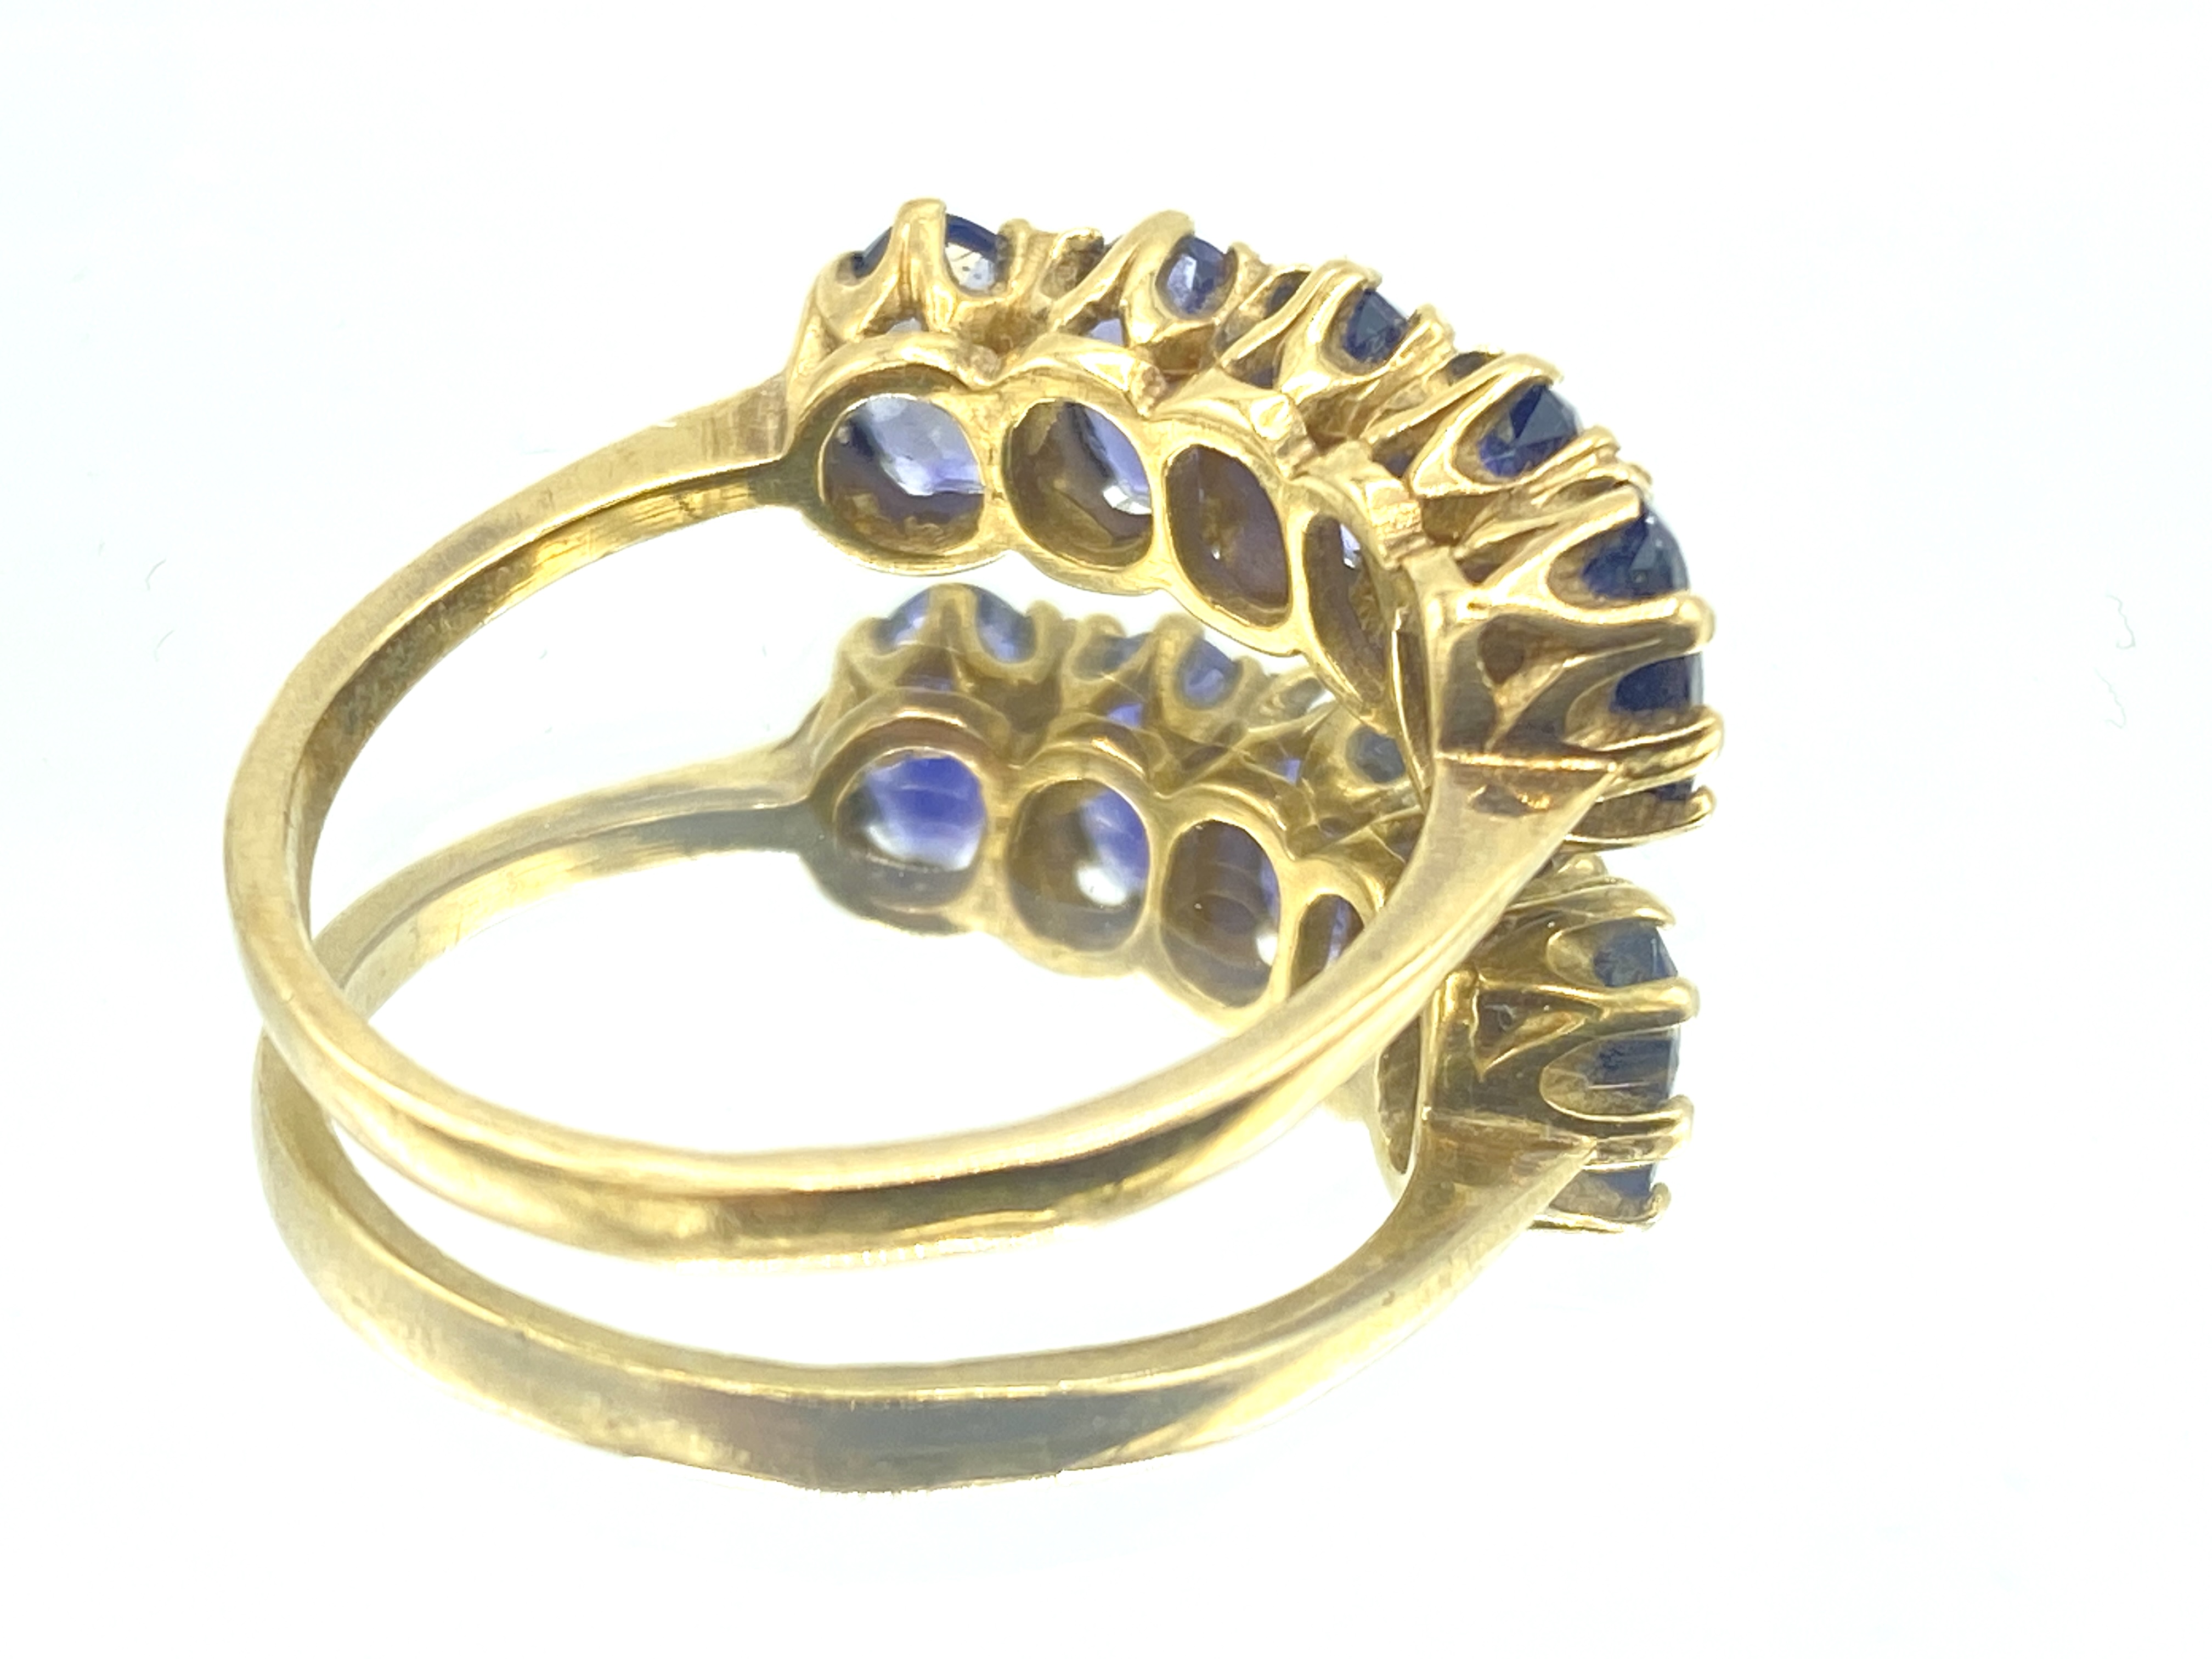 Two 9ct gold and 5 stone rings - Image 3 of 7